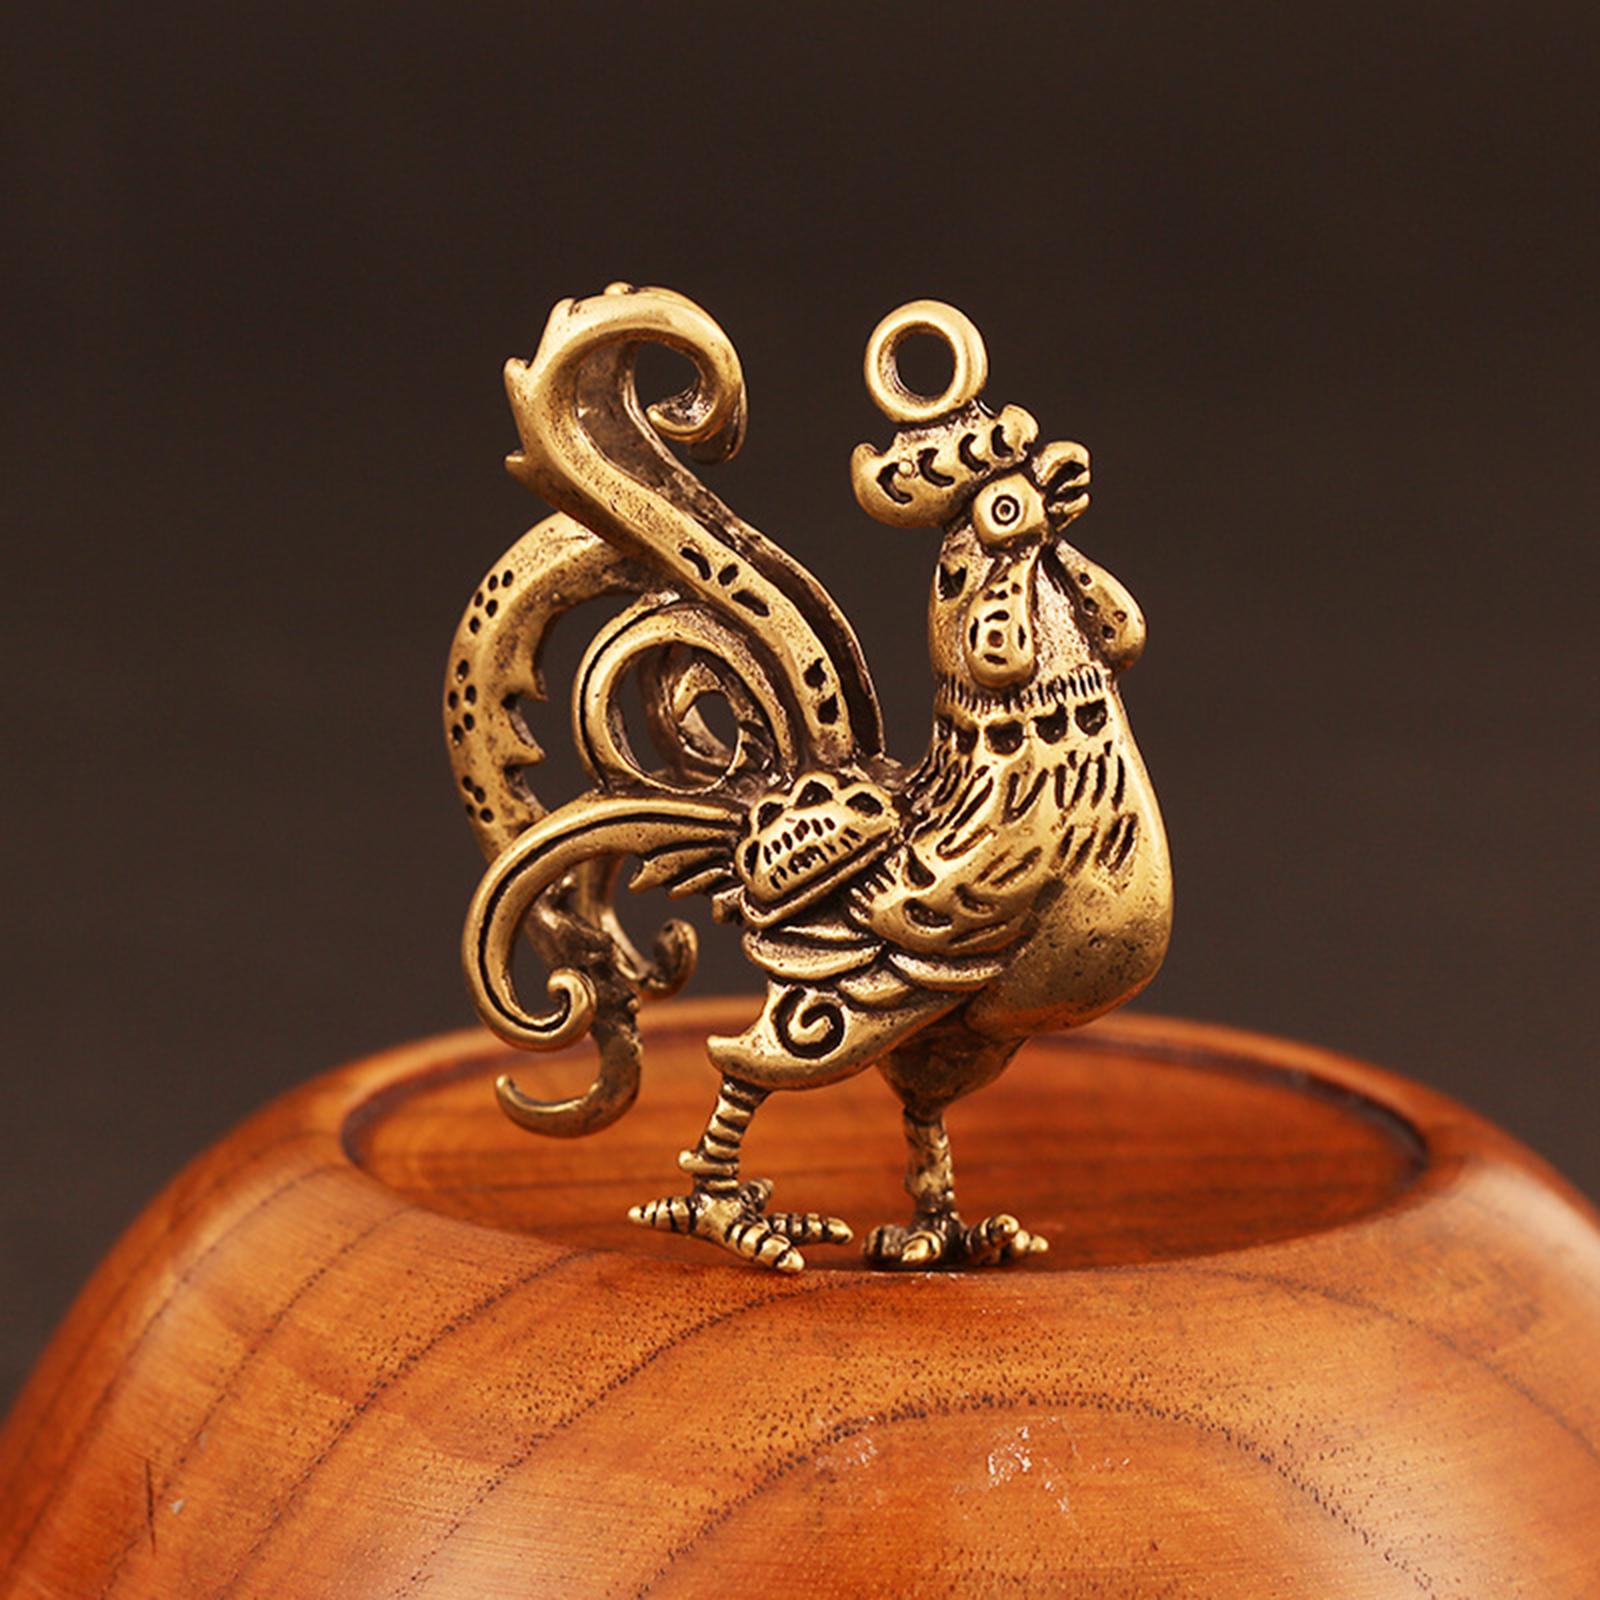 Rooster Pendant Ornament Universal Retro Devices Crafts for Unisex Home Auto